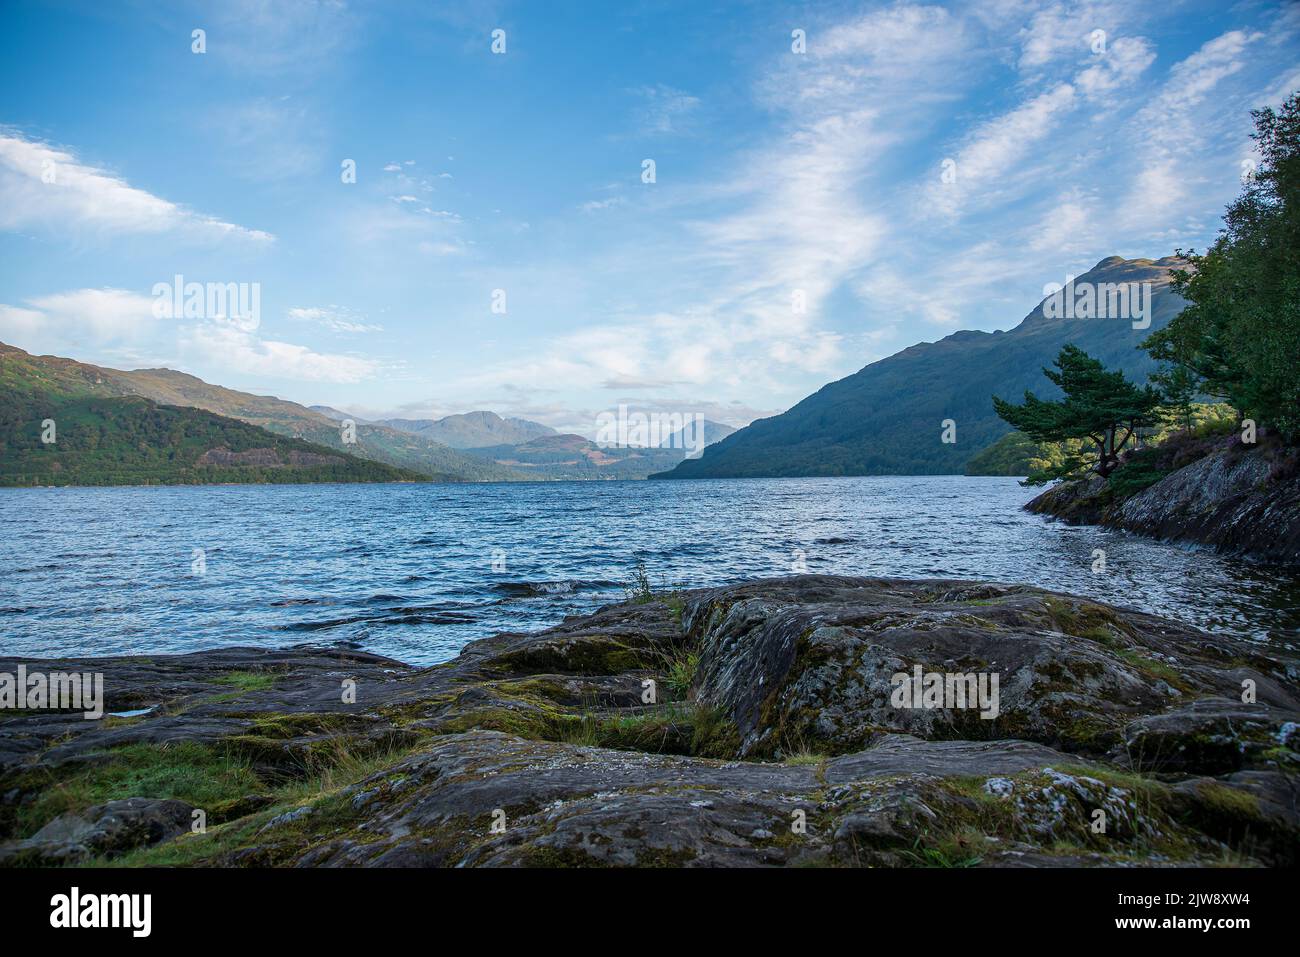 Landscape photography of lake, mountain, hill, morning, cloud, sky Stock Photo